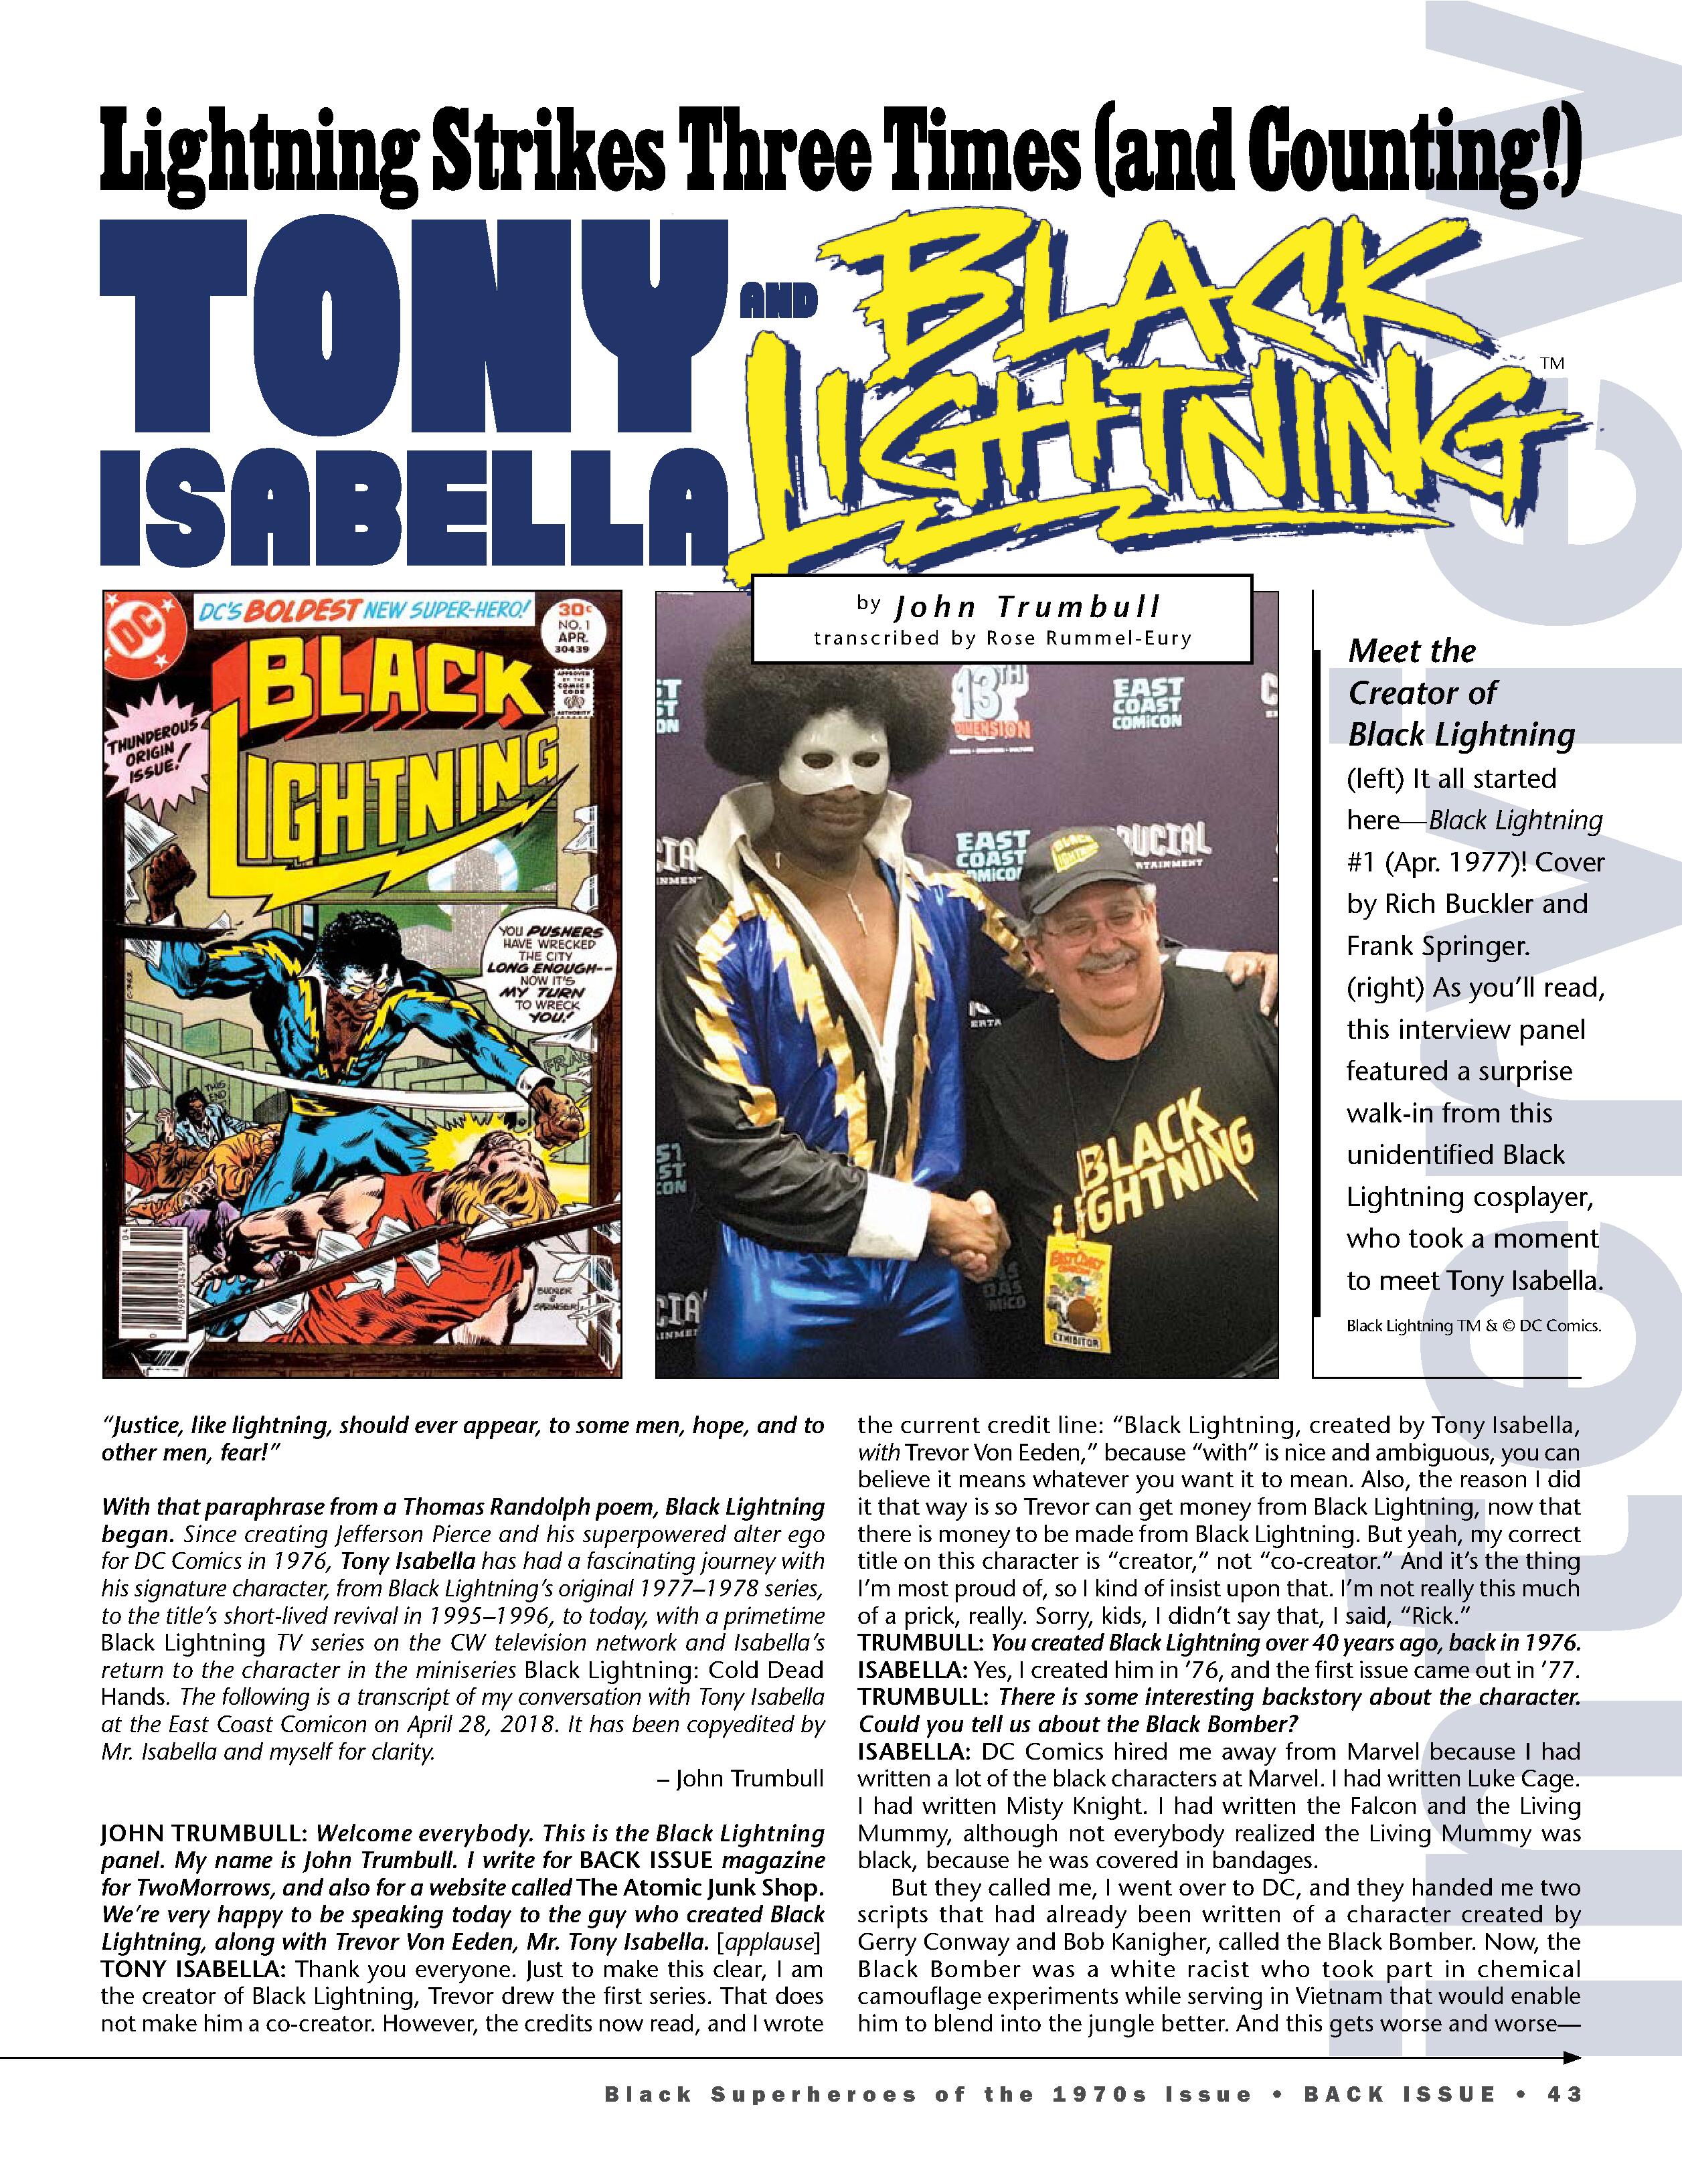 Read online Back Issue comic -  Issue #114 - 45